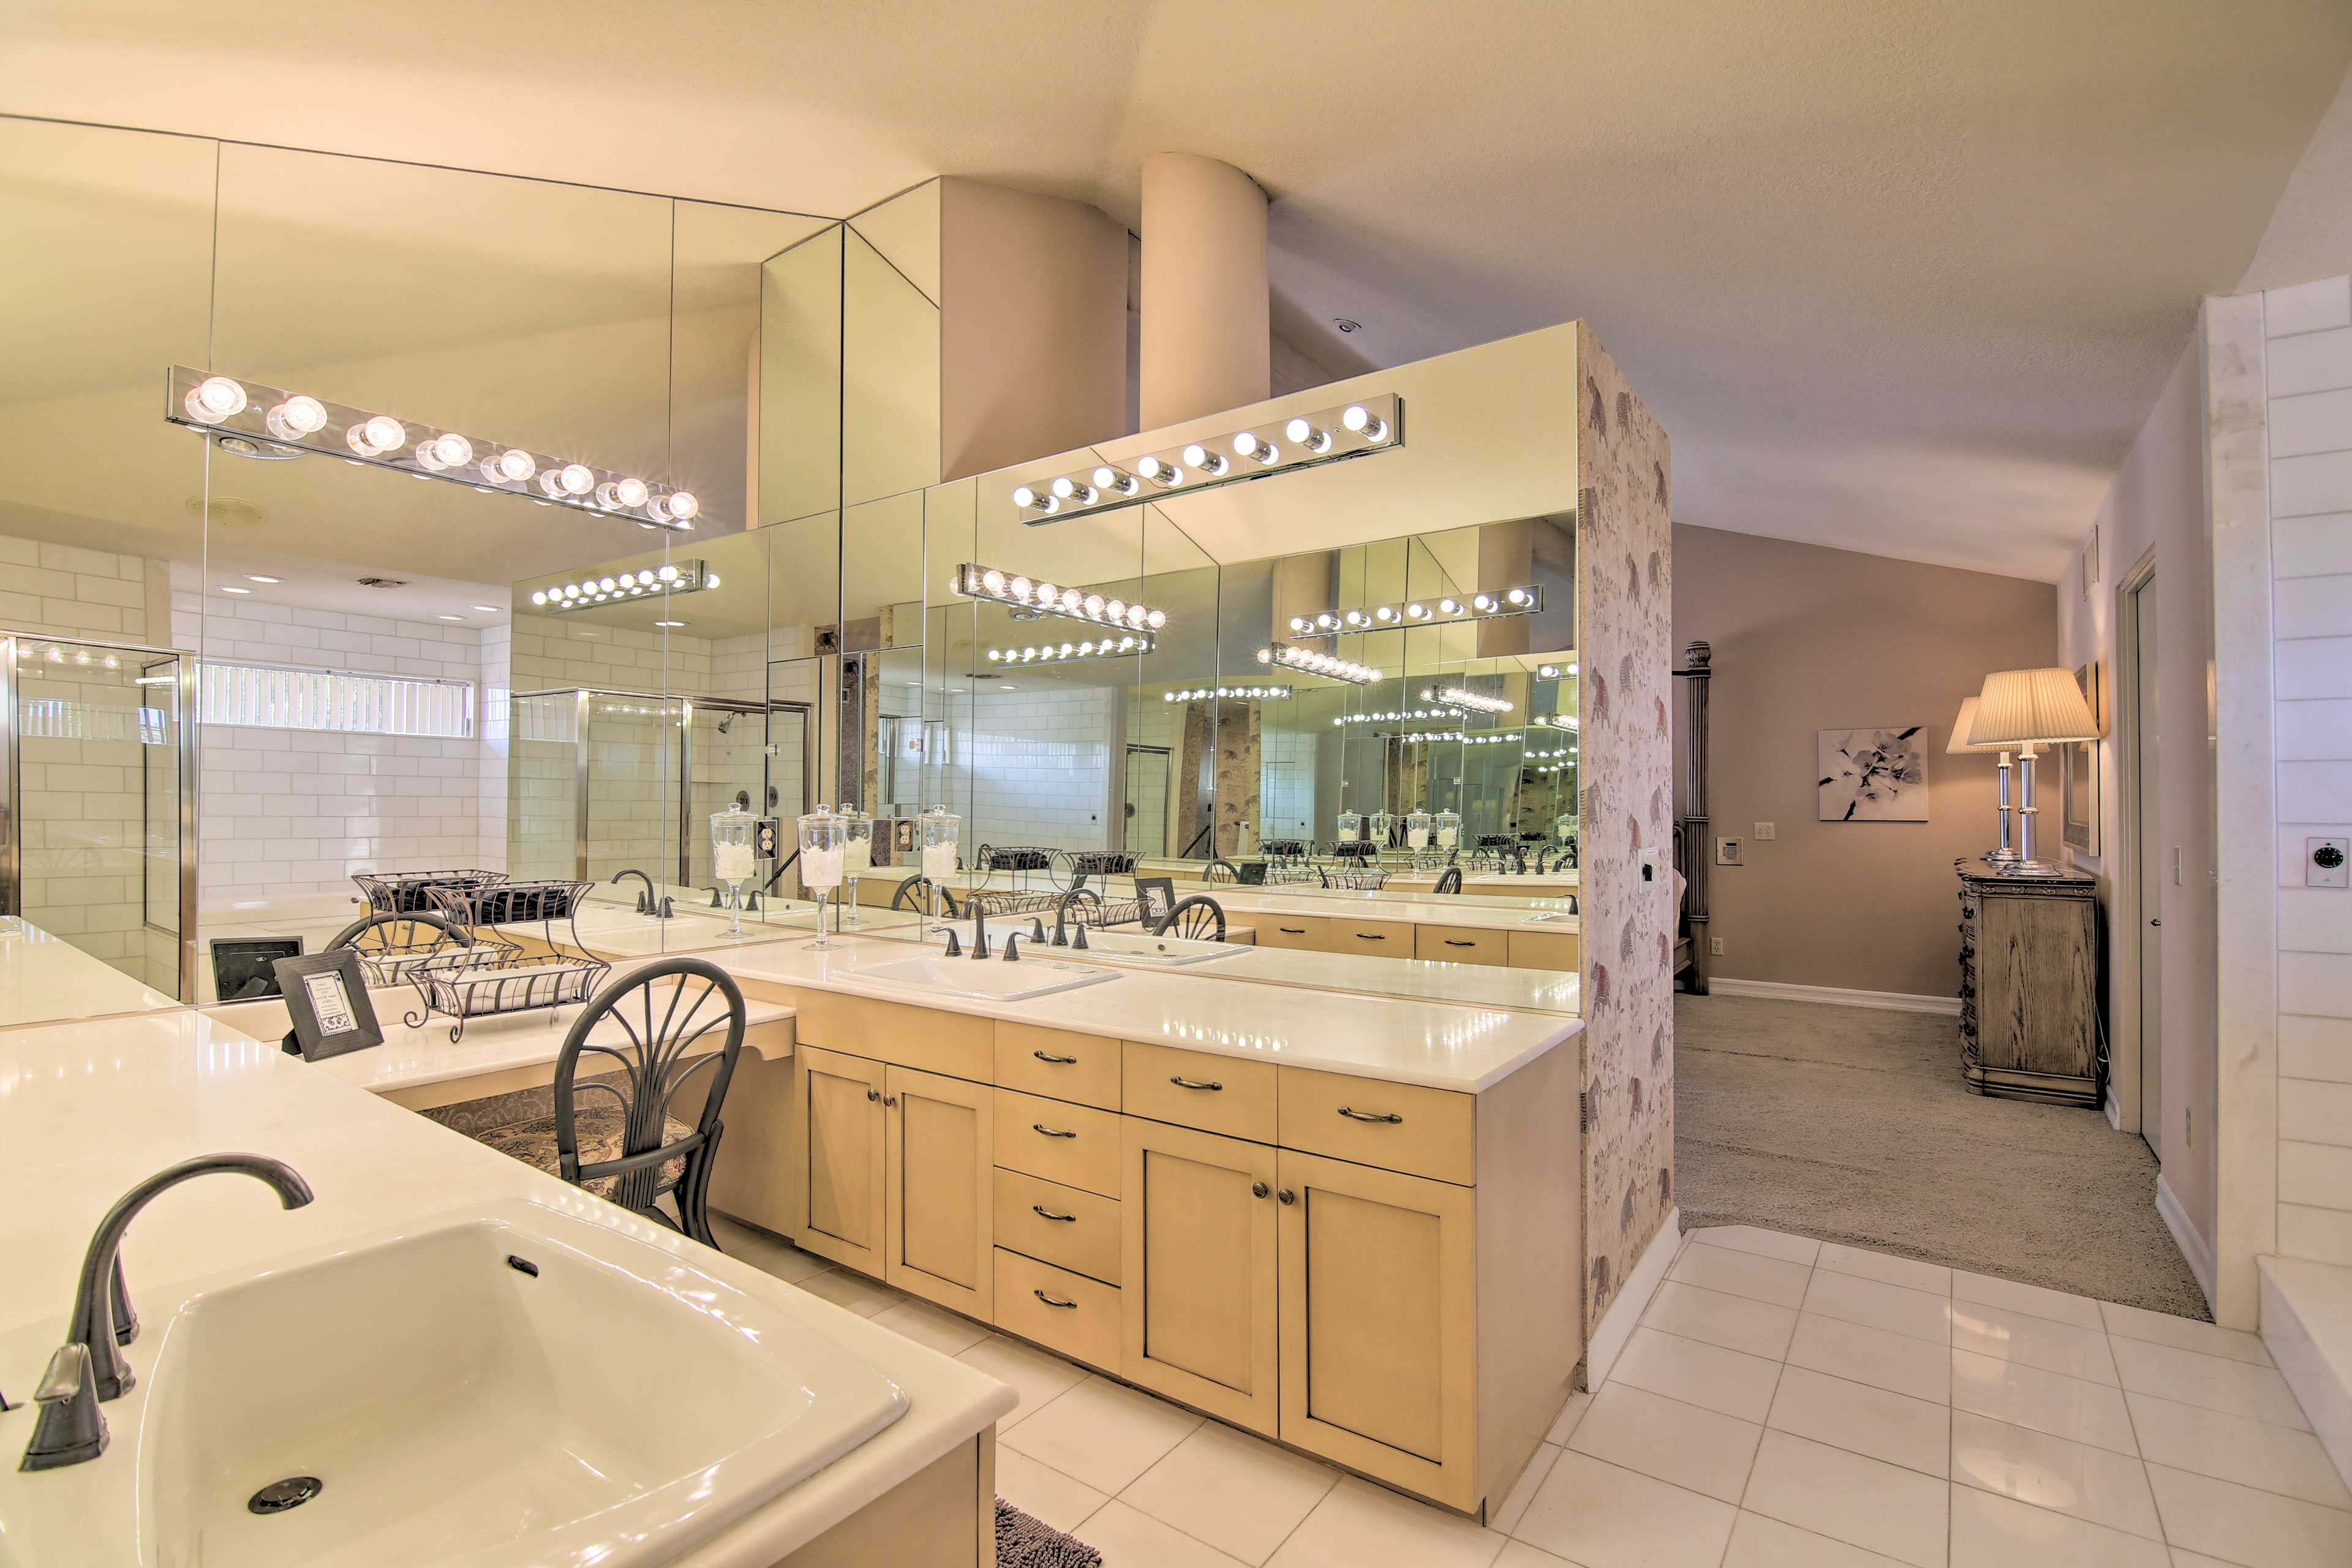 The en-suite bathroom will make getting ready in the morning easy.